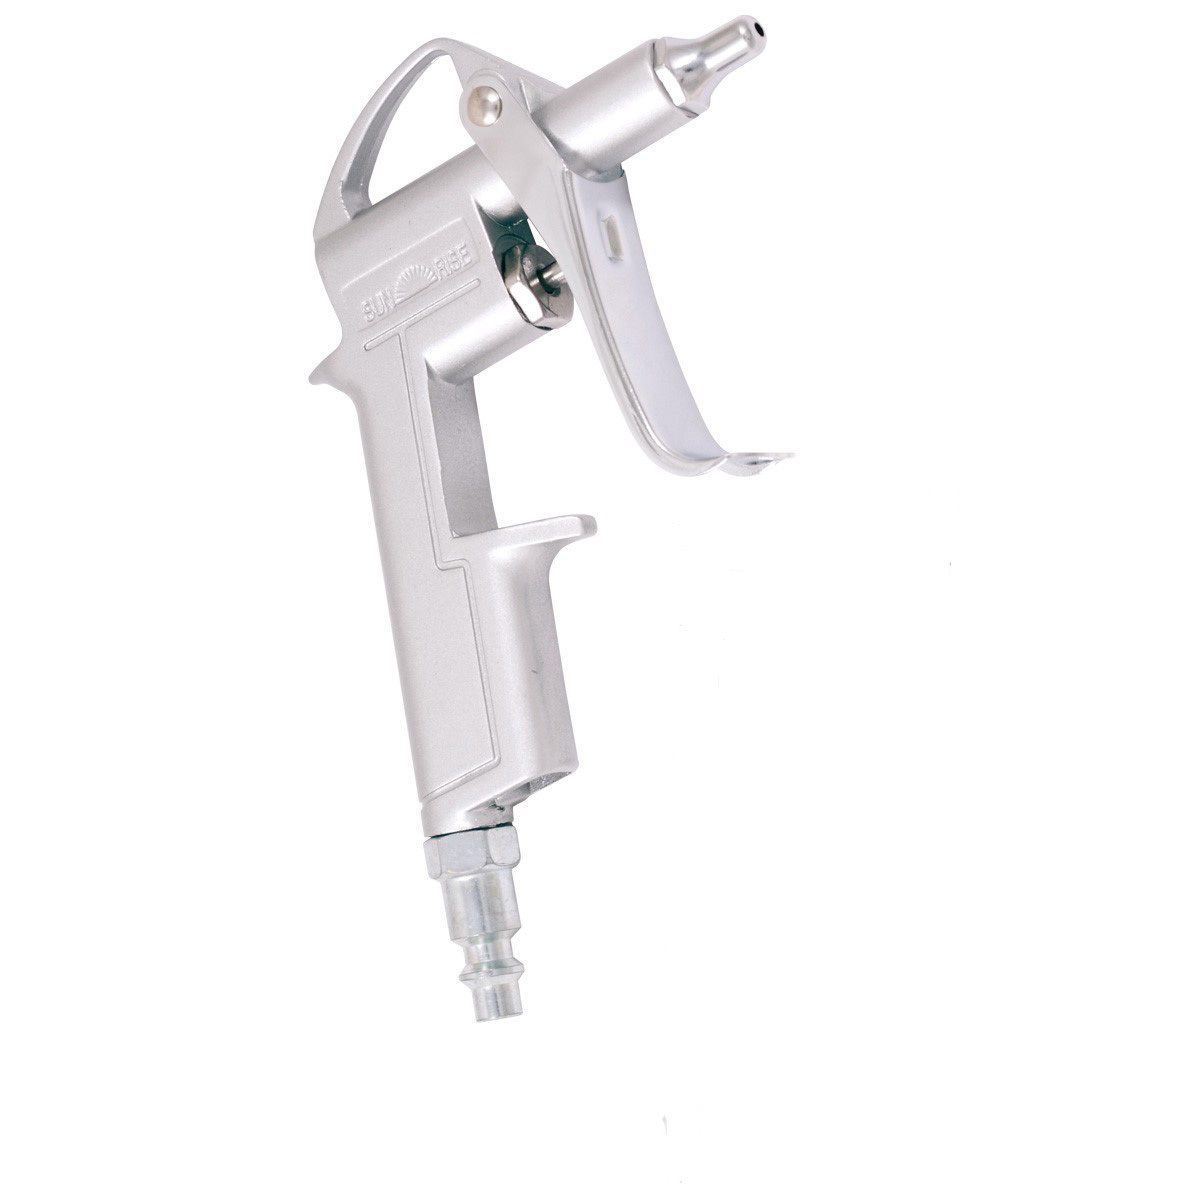 PISTOL TYPE AIR DUSTER BLOW GUN WITH 5/8" NOZZLE (7600-0191)